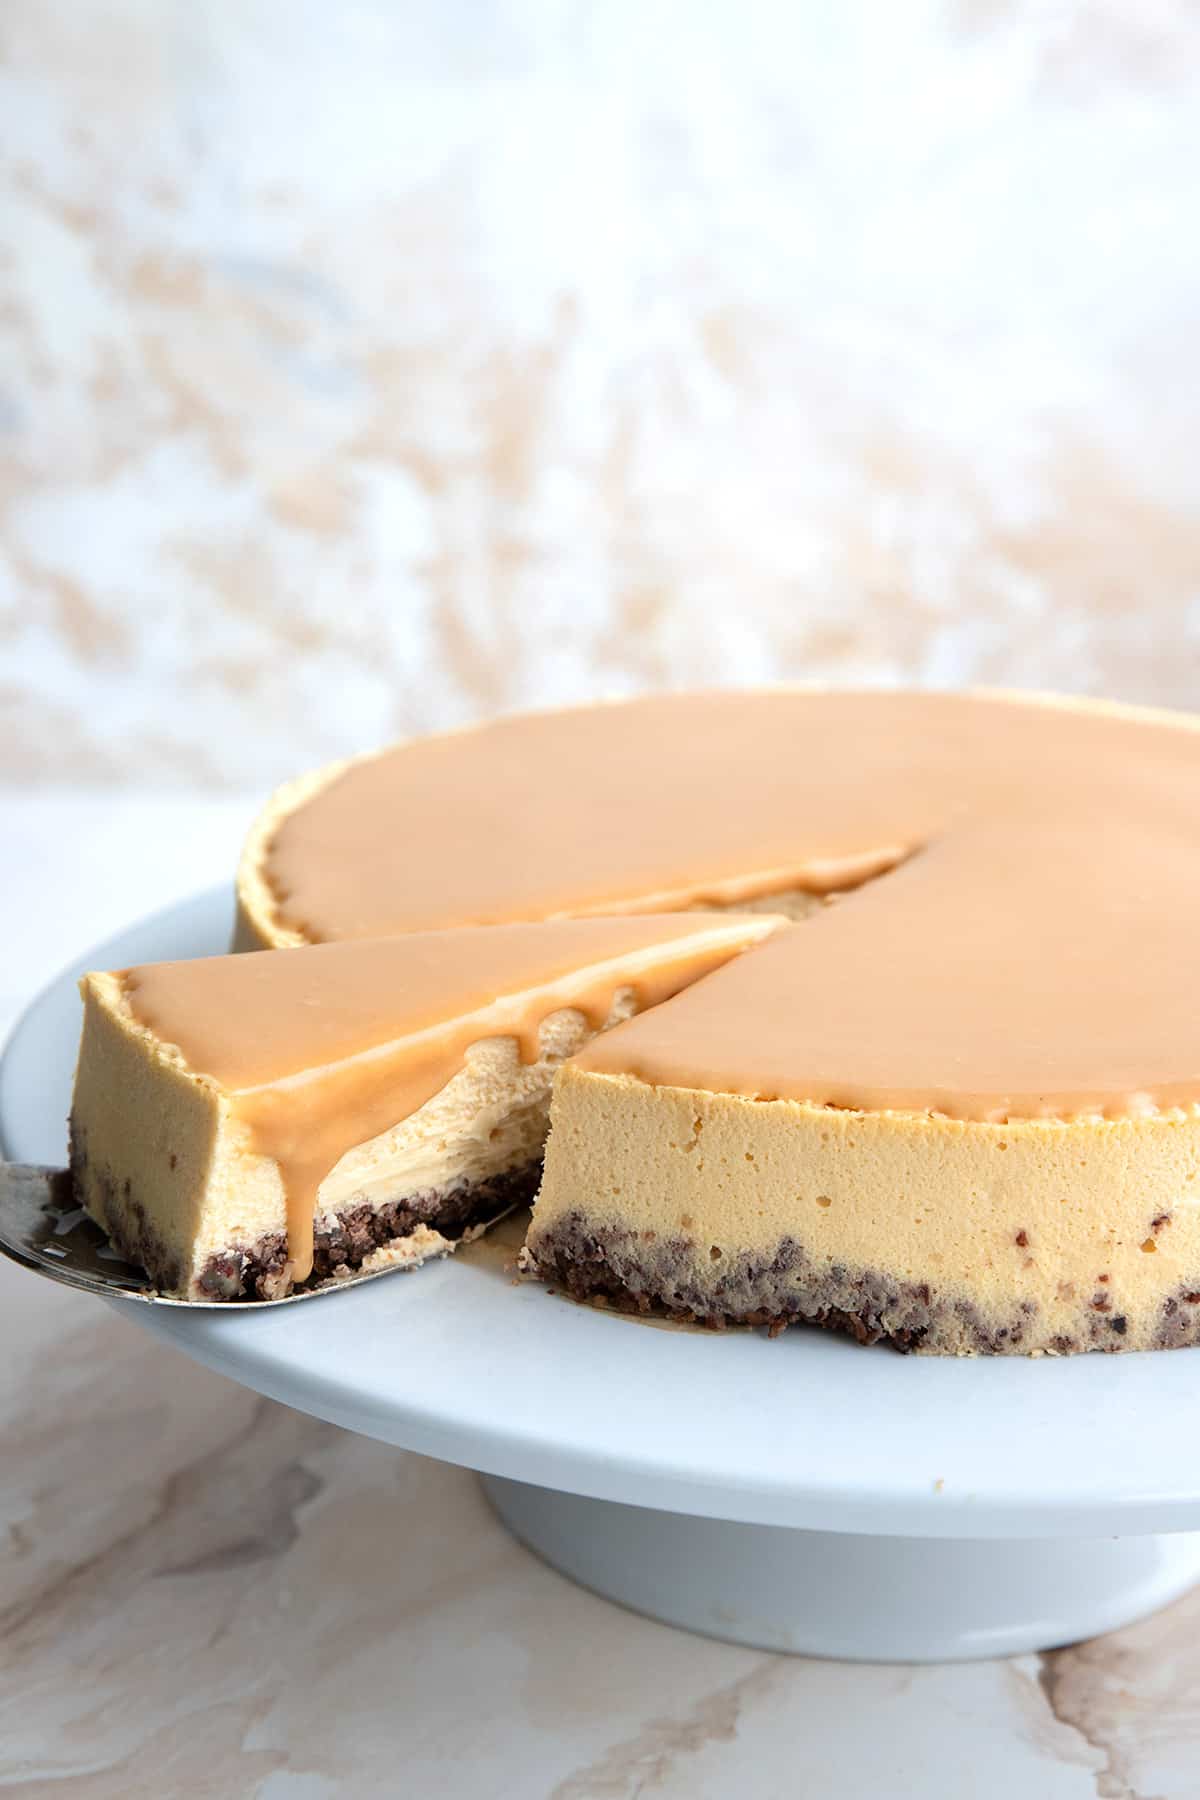 A cake platter with Dulce de Leche Cheesecake, with a slice being lifted out of it.